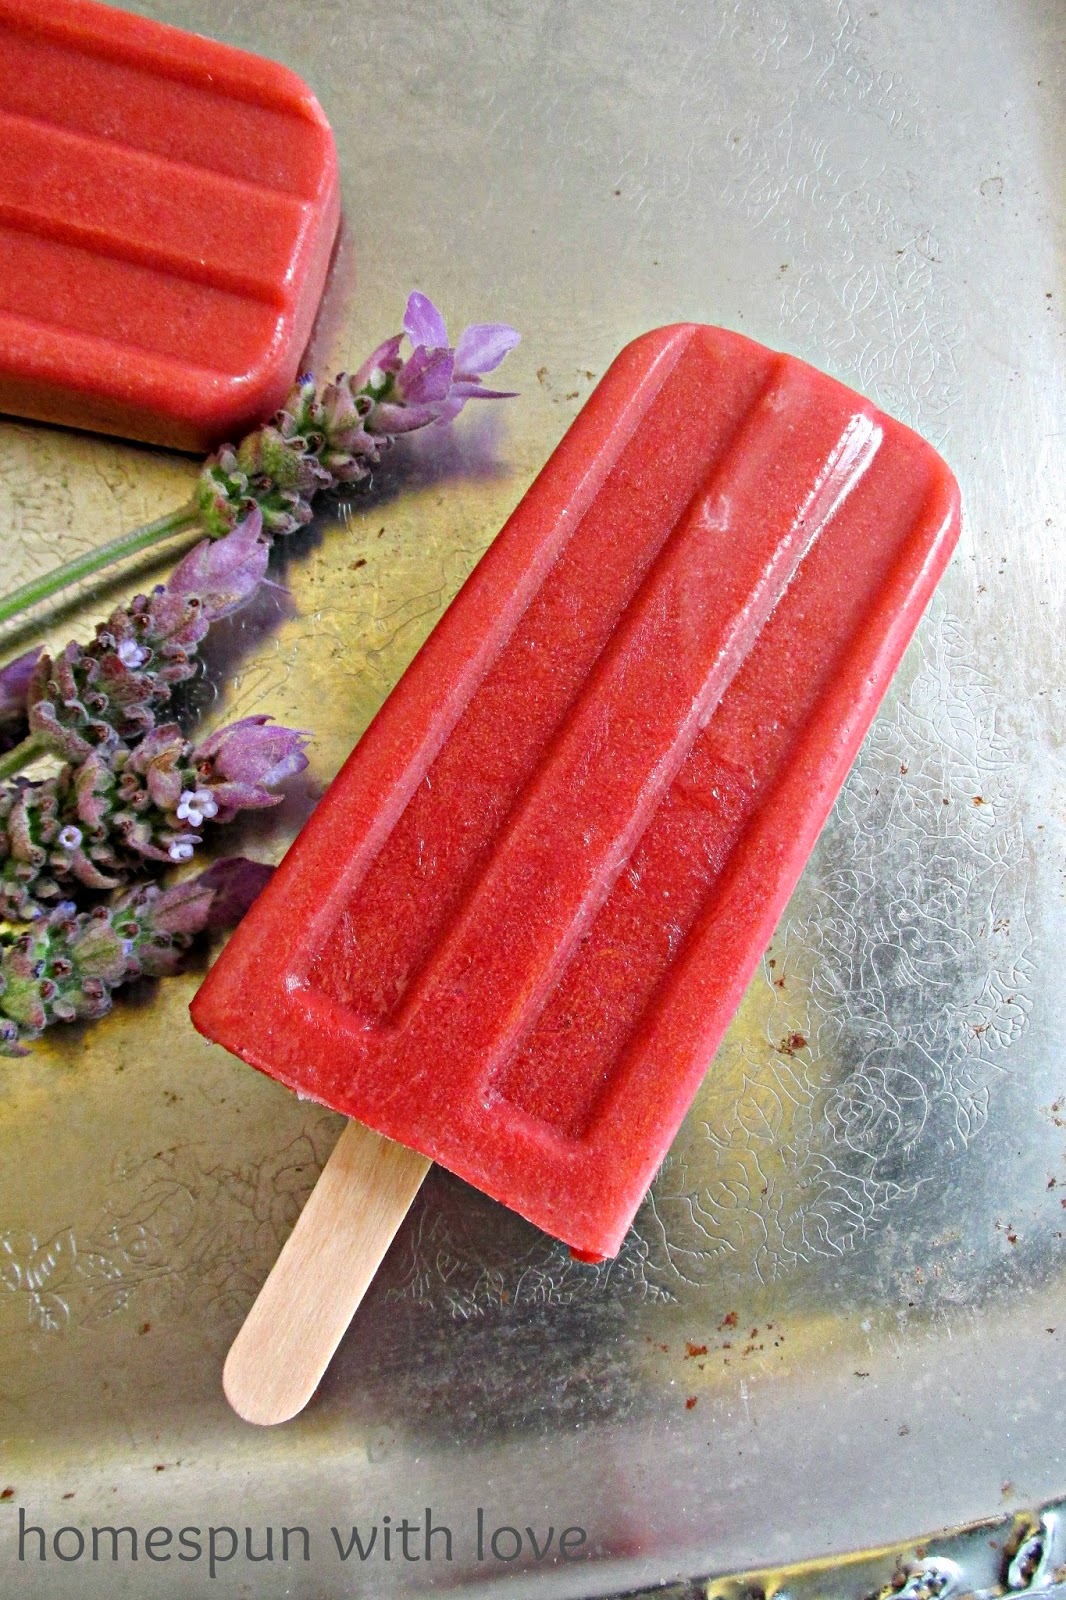 Homespun With Love: Strawberry Pineapple Smoothie Popsicles